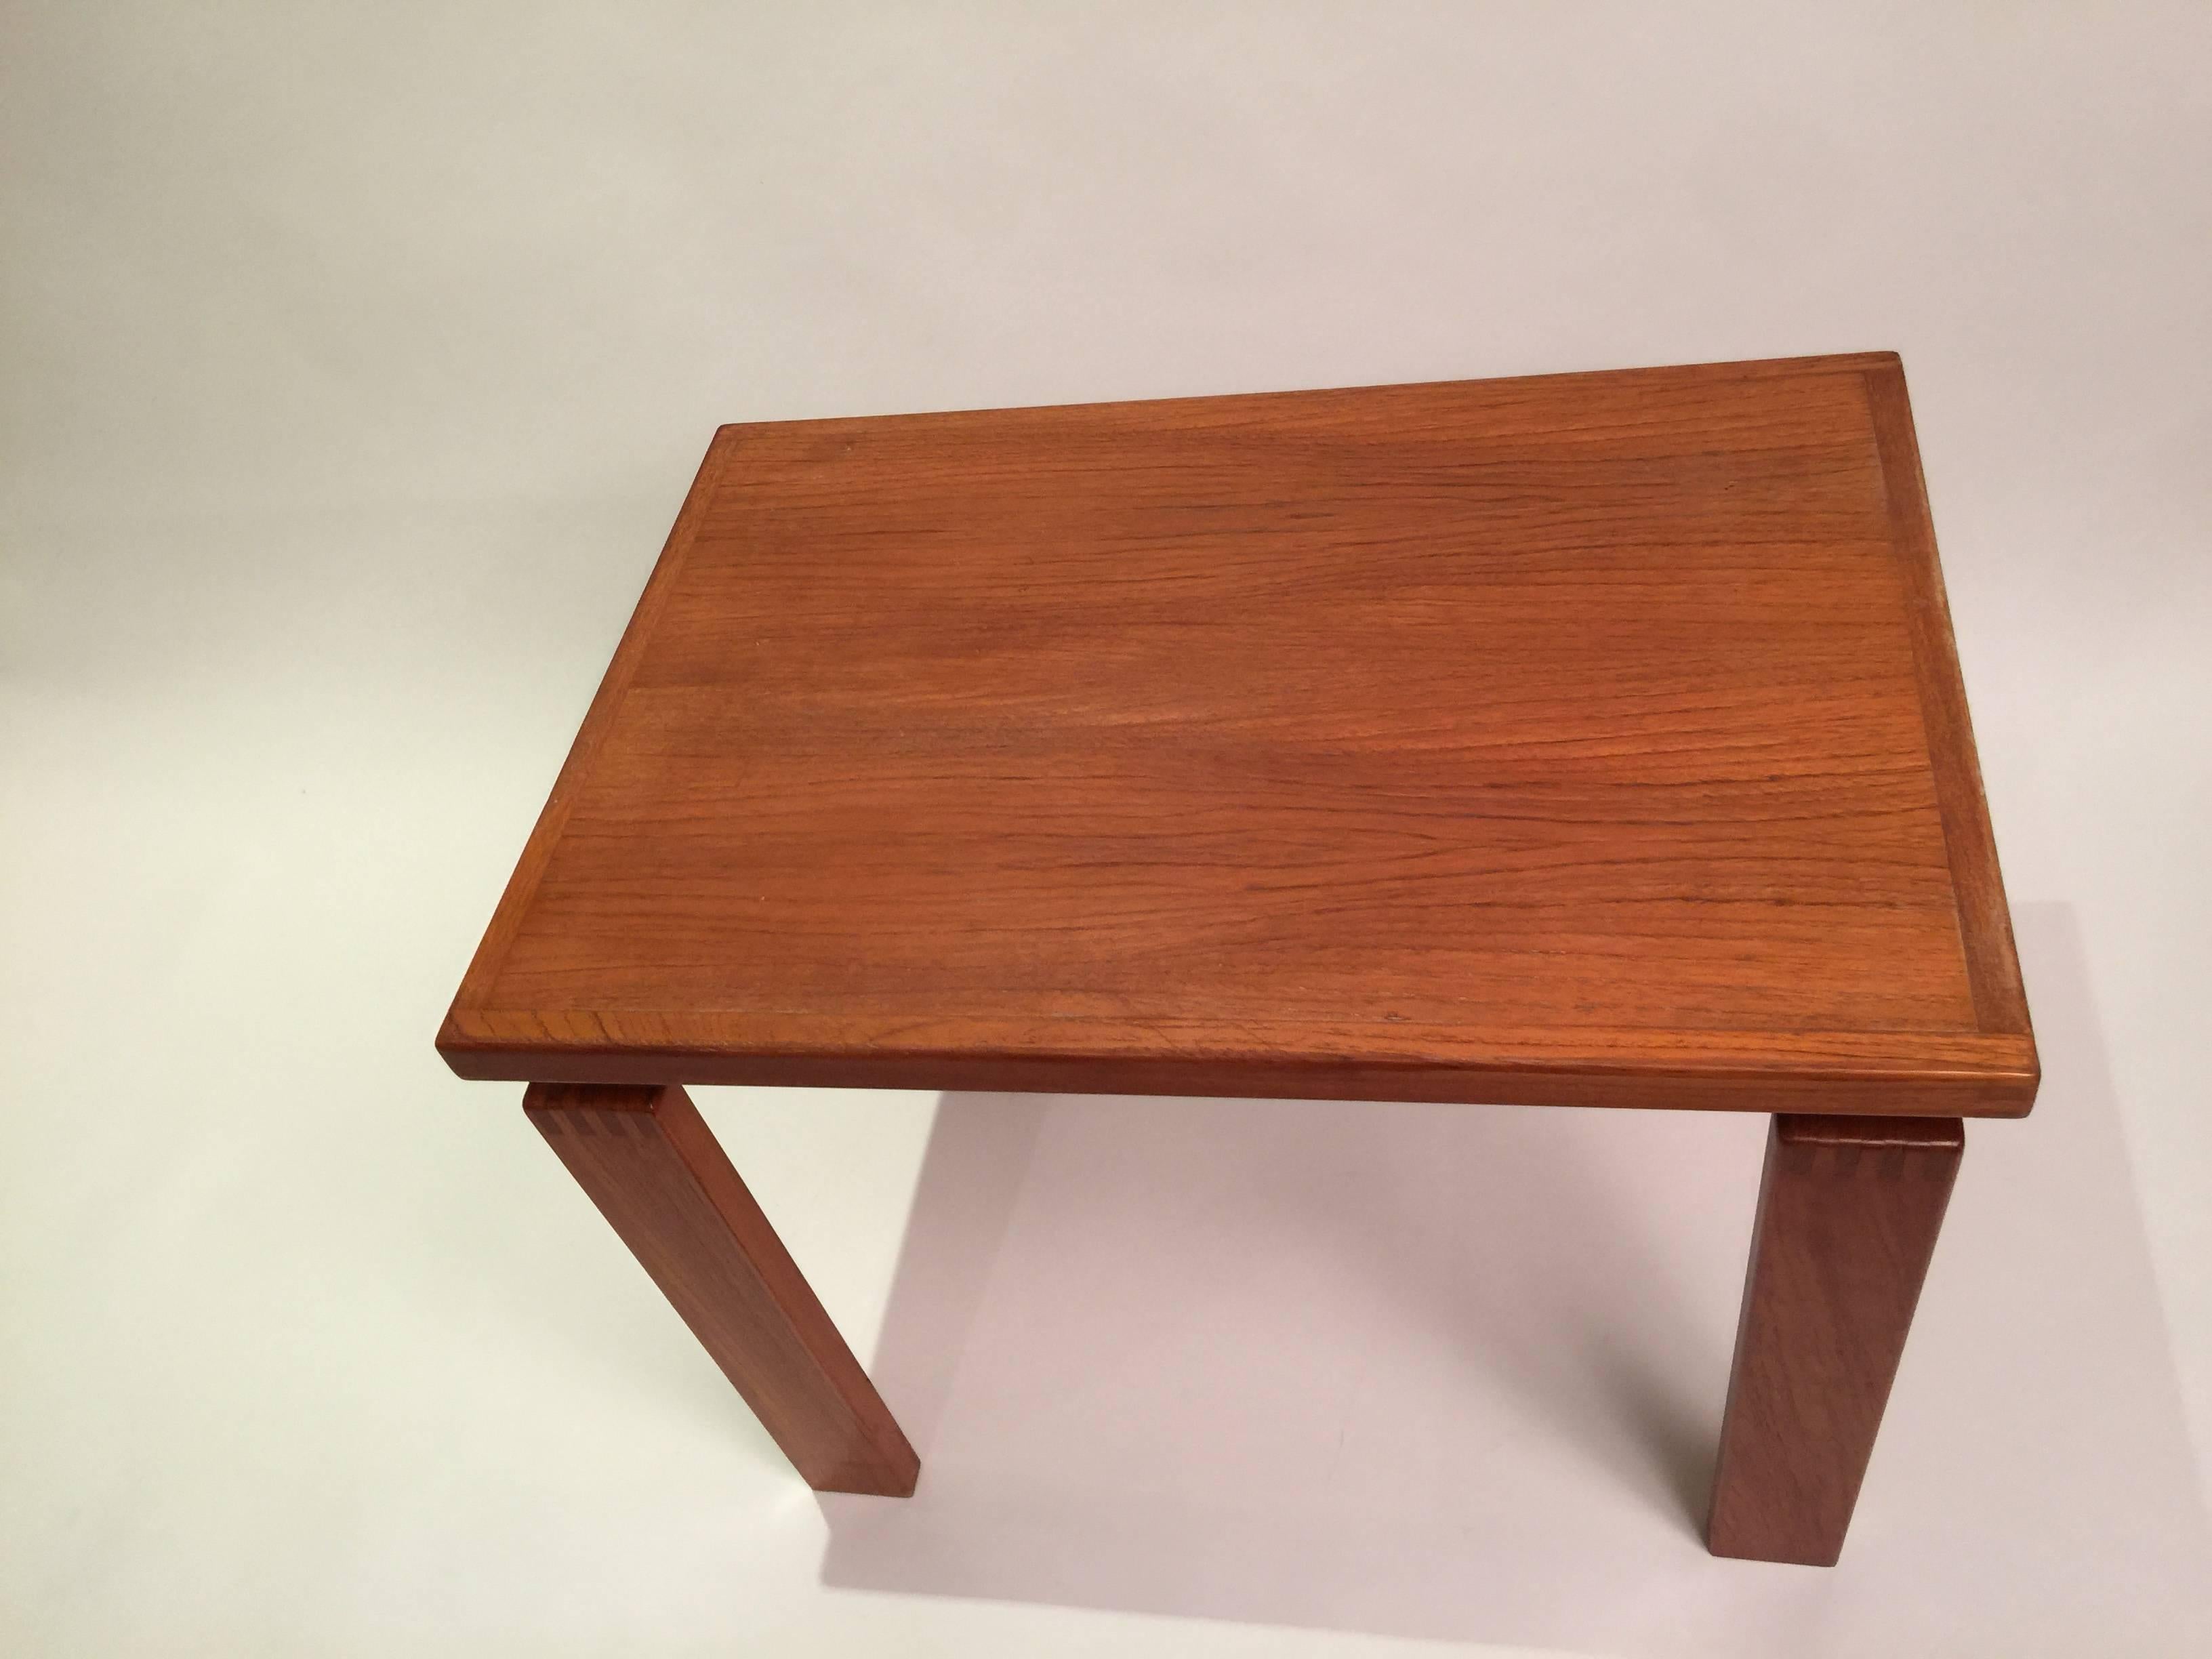 Solidly built and simply designed this teak side table features a floating top with dovetailed accents on the corners of the table top and legs. This late modern design is robust and practical with a design to suit any space.